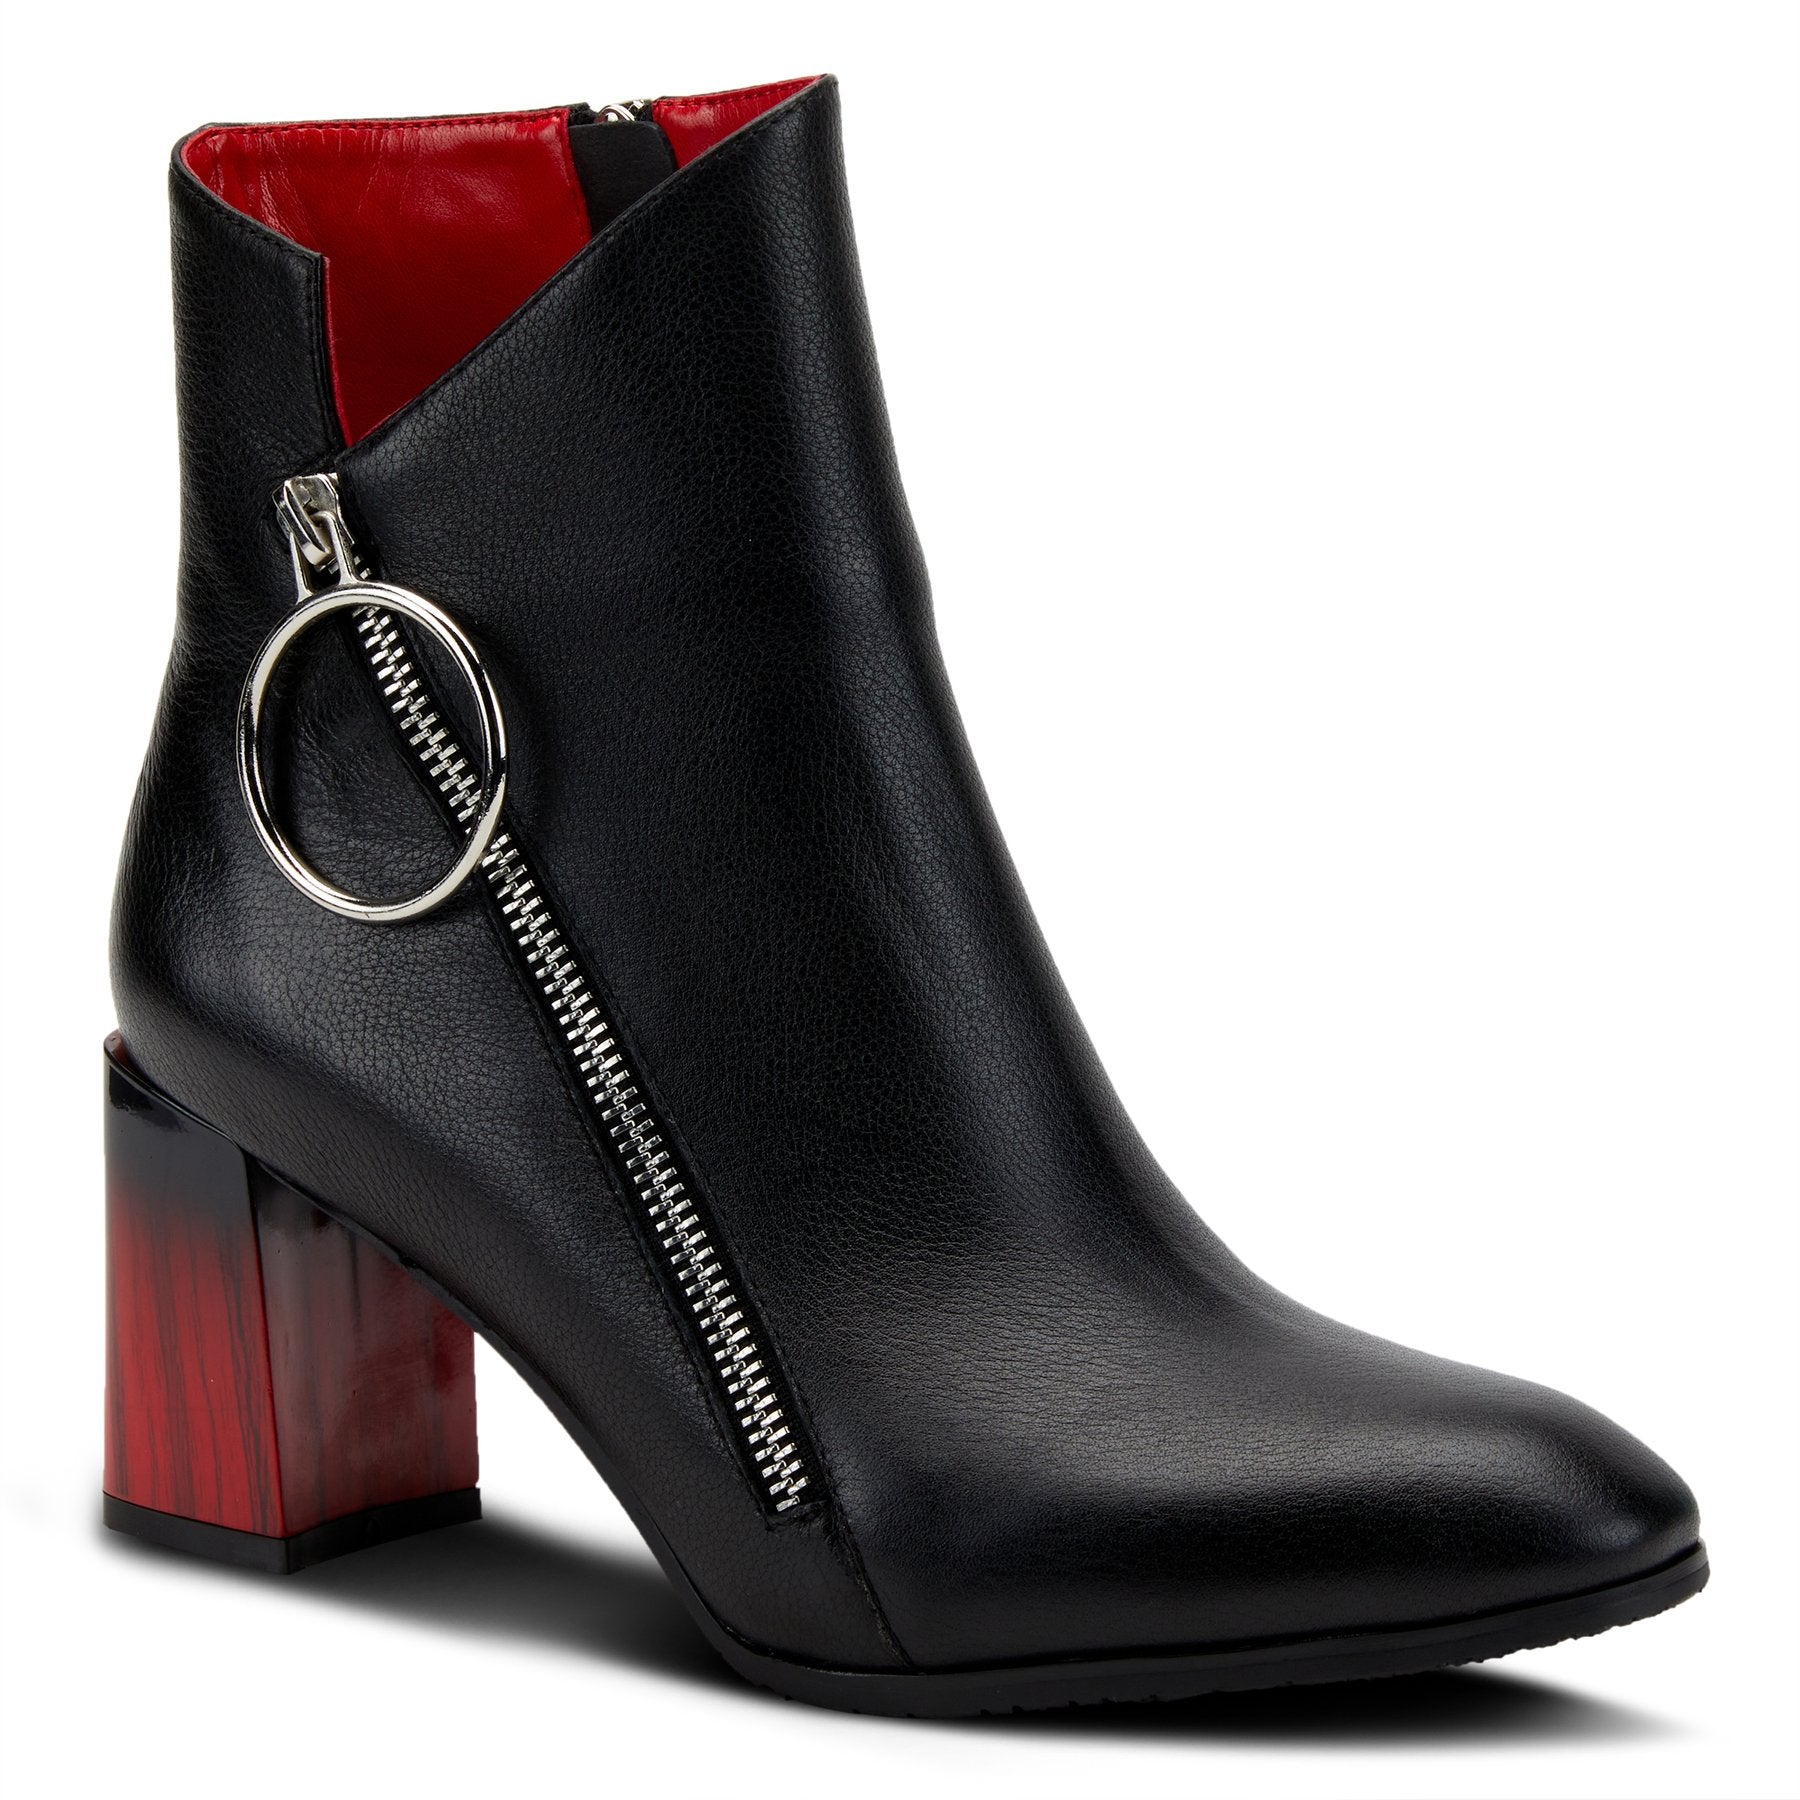 Outer front side view of the azura fabulosa boots. These boots are black with a black to red faded heel. The Boot has an outer zipper running asymmetrically across the outer side with a decorative circle.